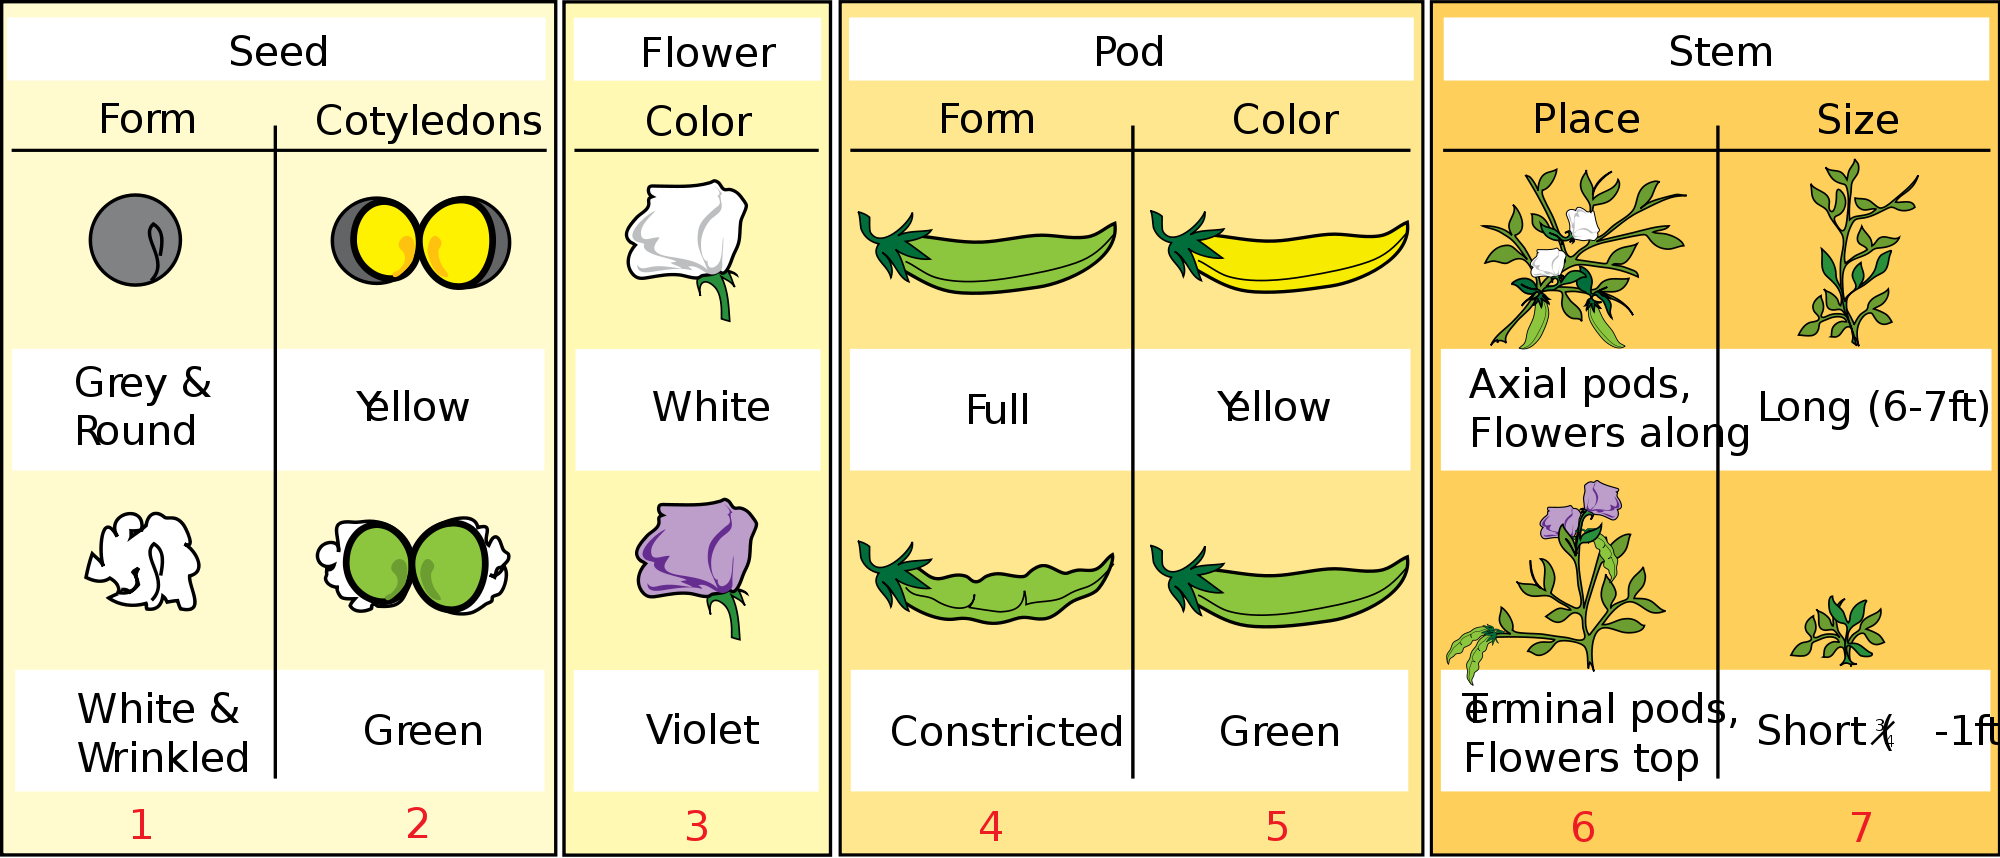 Seven different variable traits in pea plants include flower color, seed color, flower position, pod shape, stem length, pod color, and seed shape.